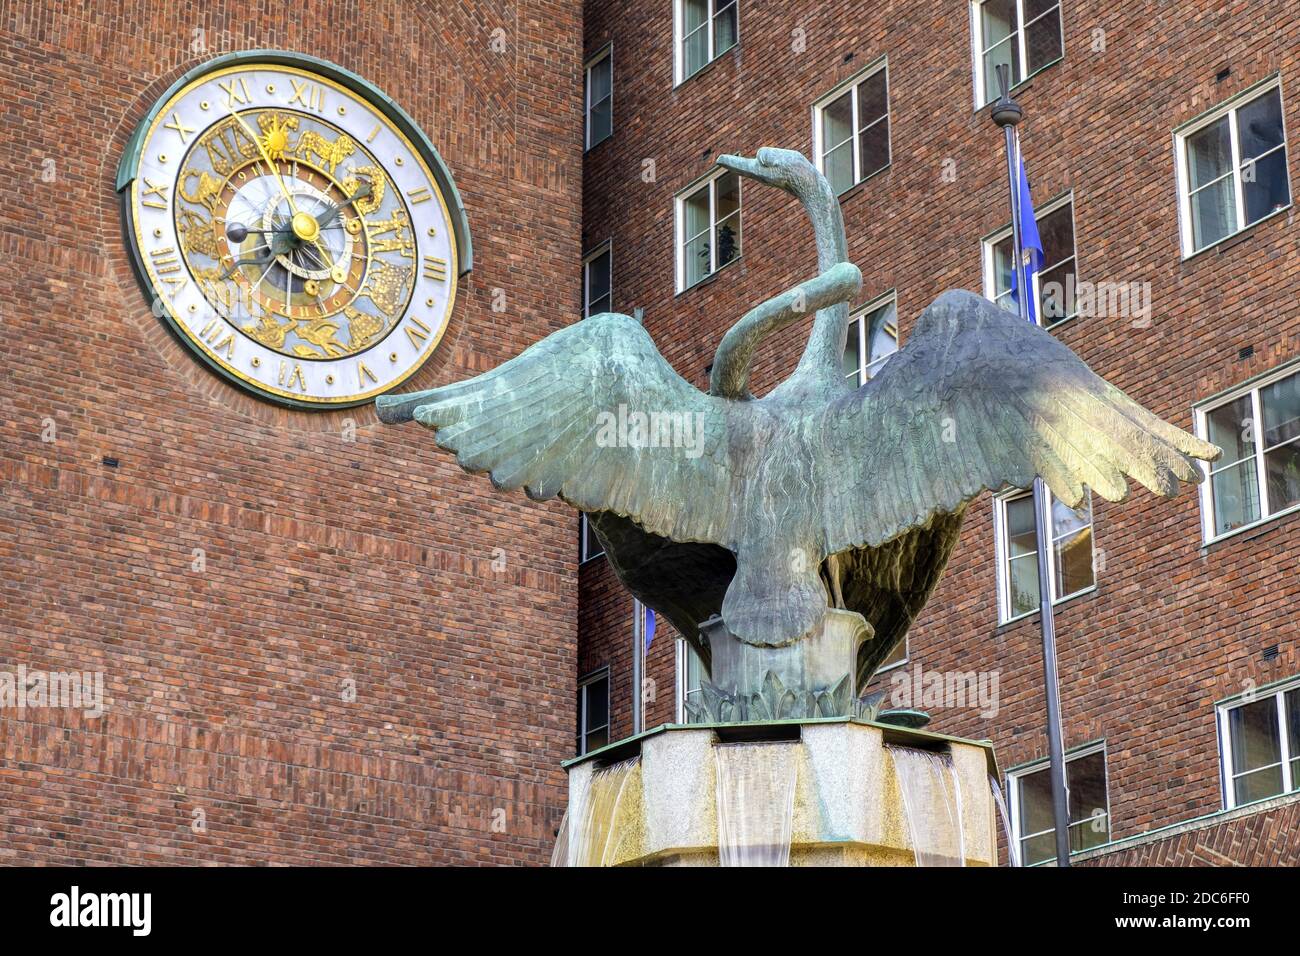 Oslo, Ostlandet / Norway - 2019/08/30: Swan fountain sculpture by Dyre Vaa in front of City Hall historic building - Radhuset - with astronomic tower Stock Photo